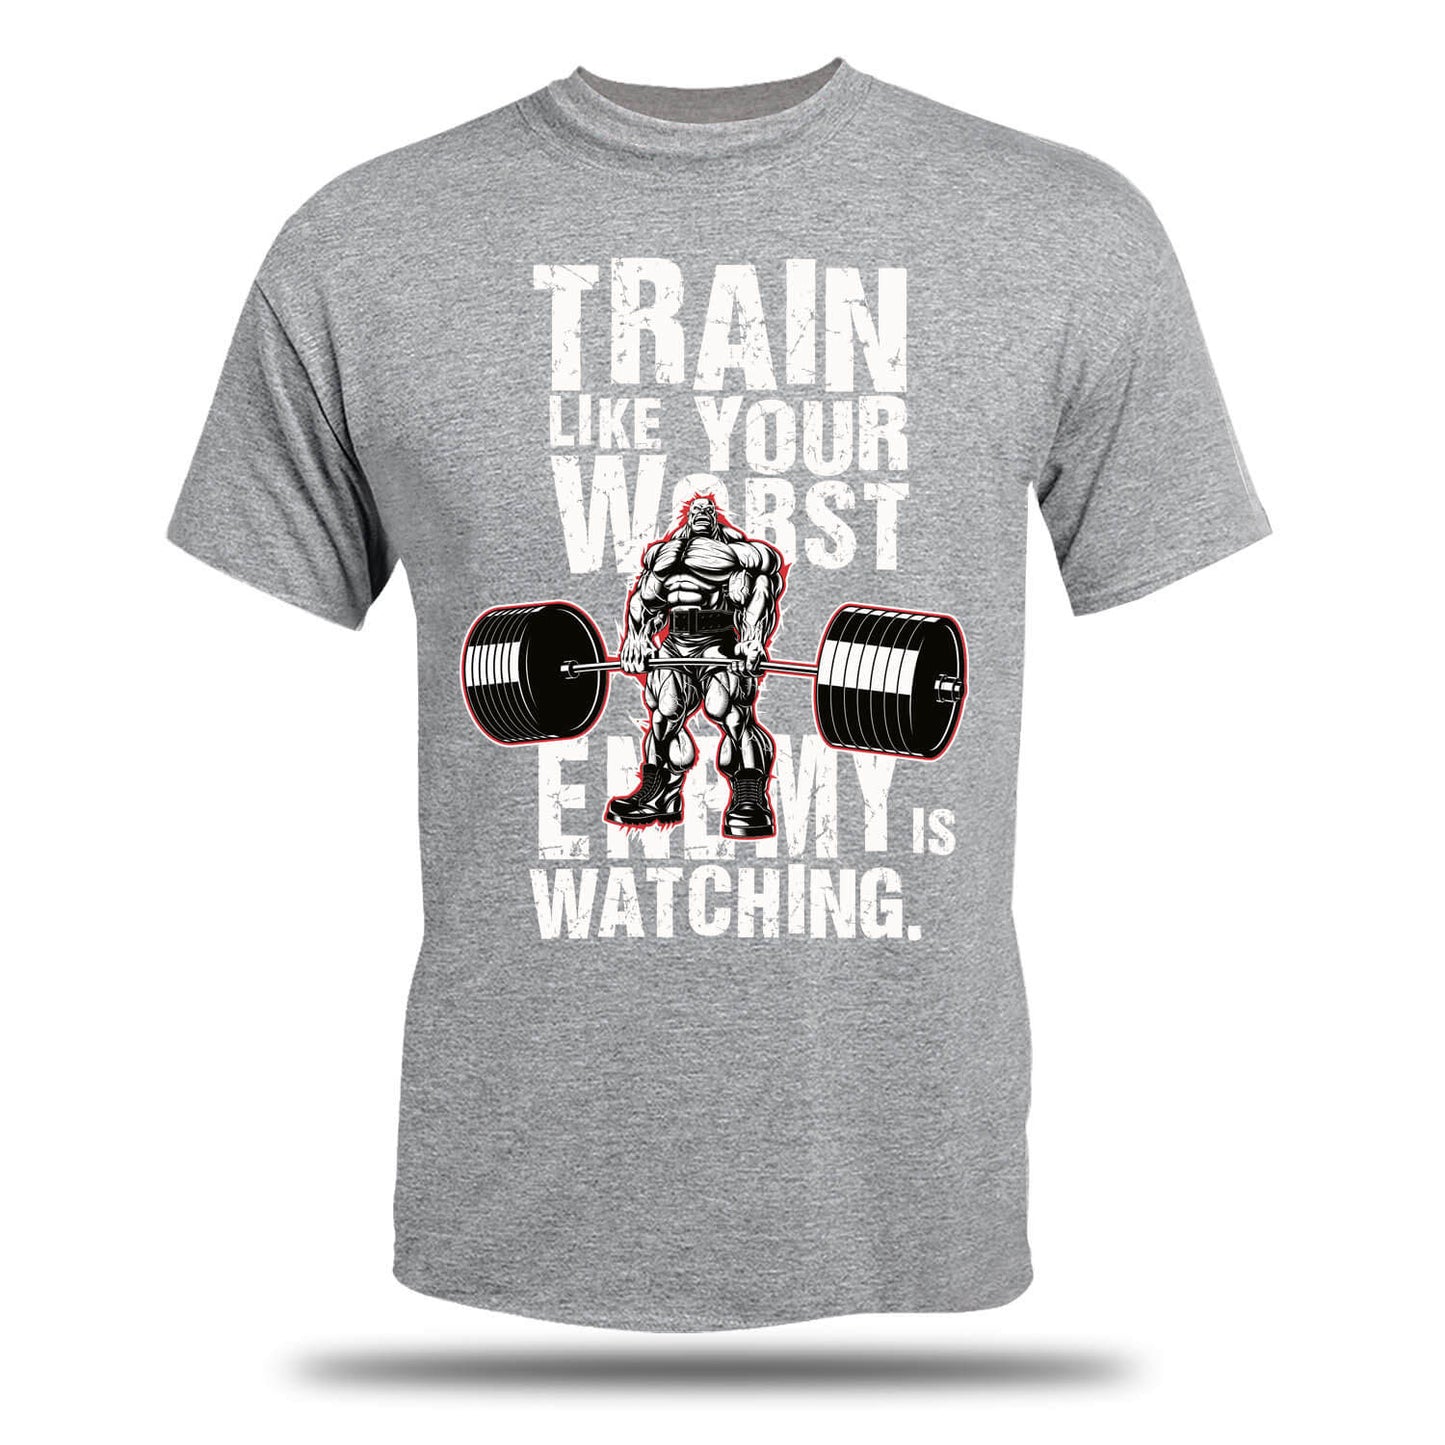 Train Like Your Worst Enemy is Watching